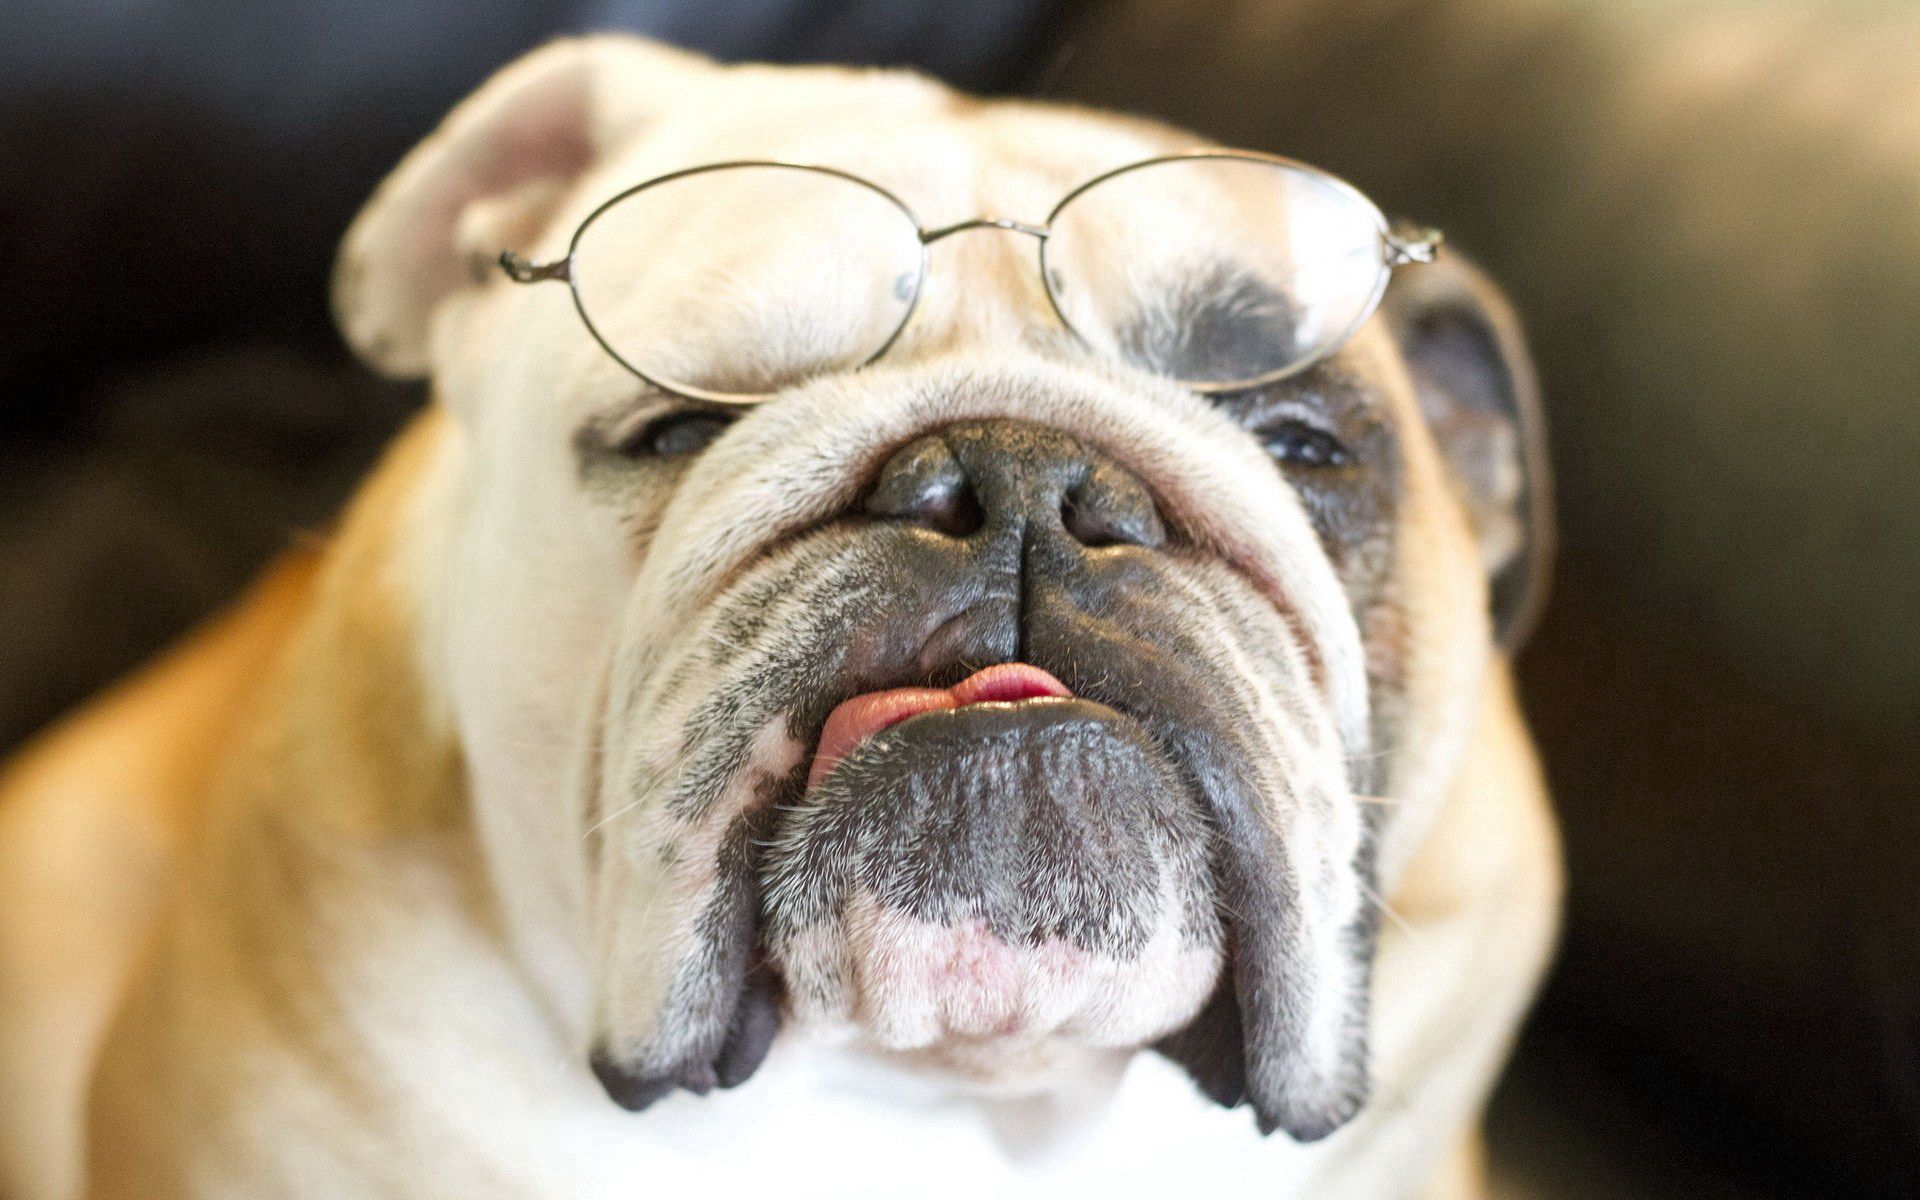 vertical wallpaper opinion, animals, dog, muzzle, sight, glasses, spectacles, bulldog